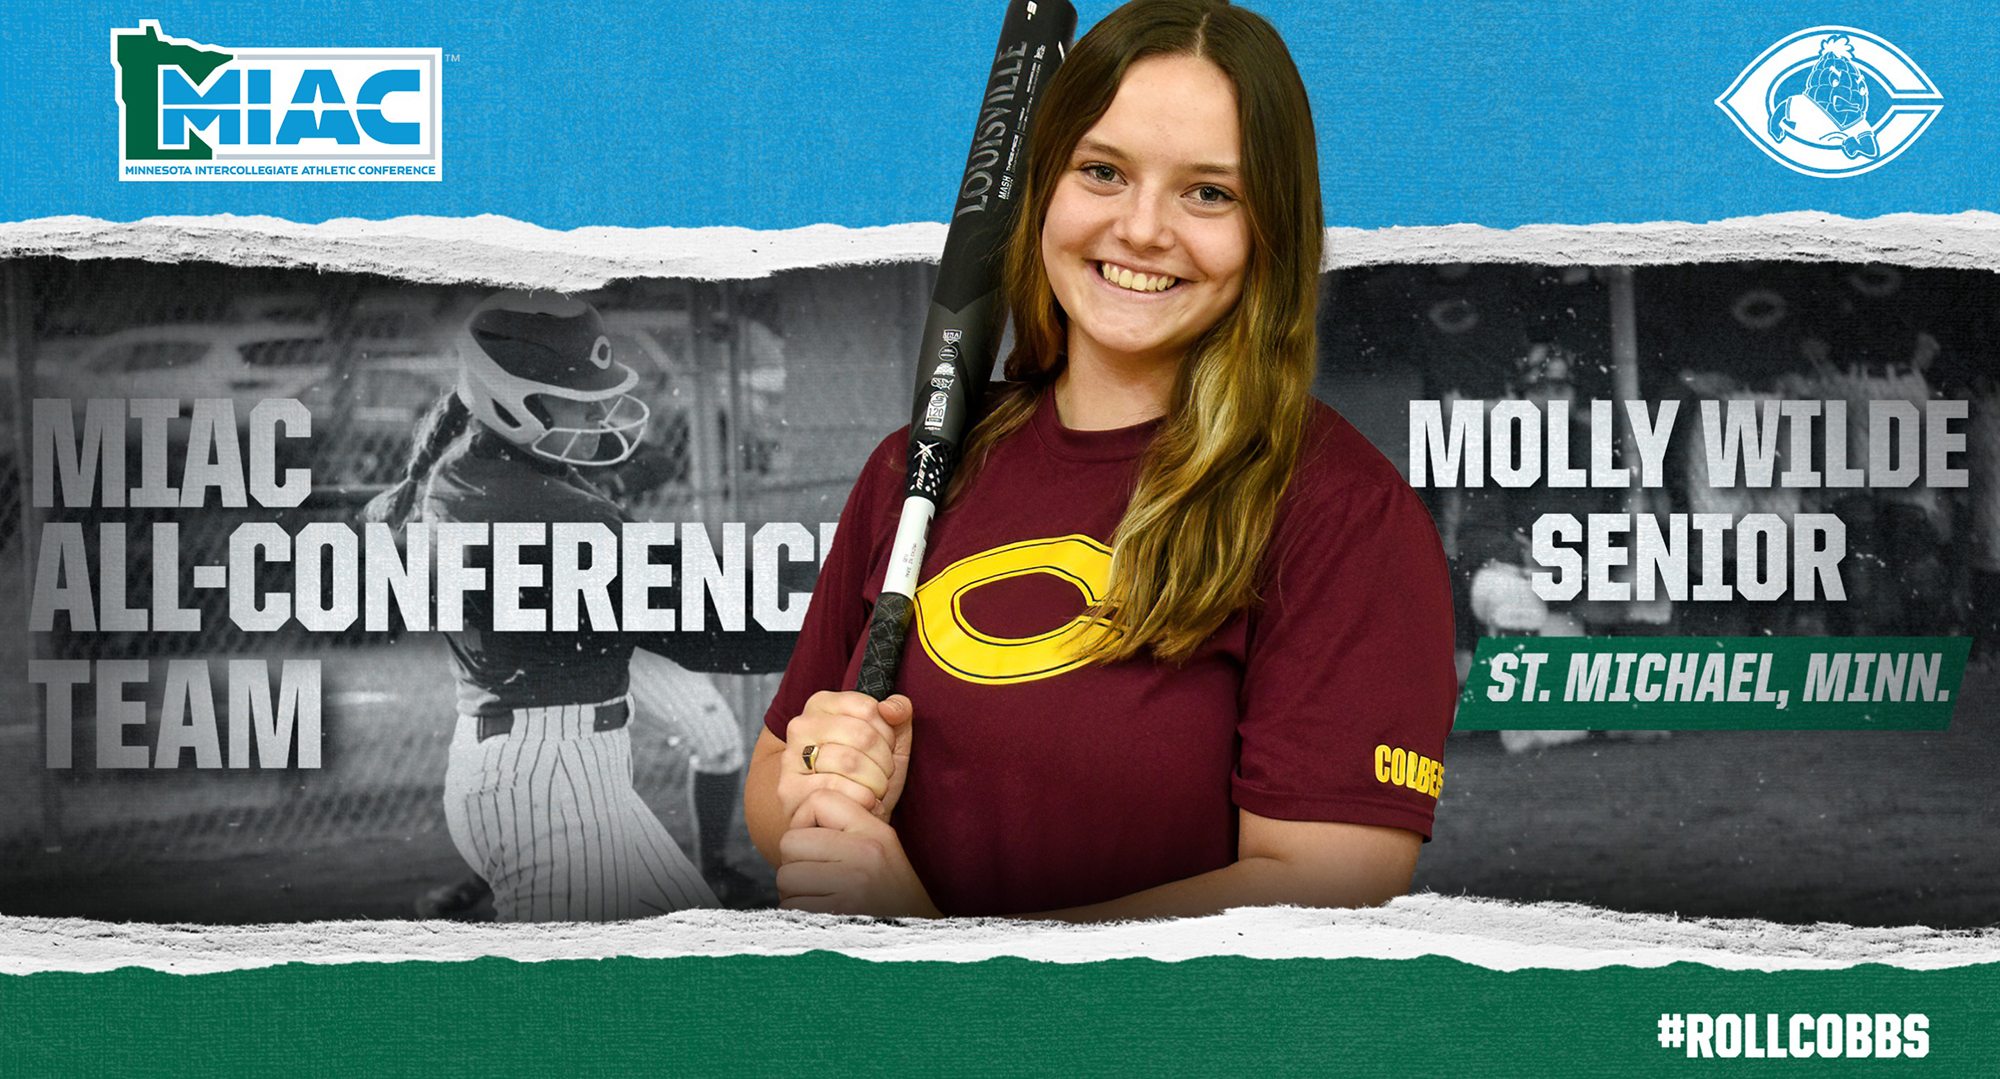 Molly Wilde was named to the MIAC All-Conference Team. She led the team in hits, home runs, RBI and slugging percentage in MIAC games.